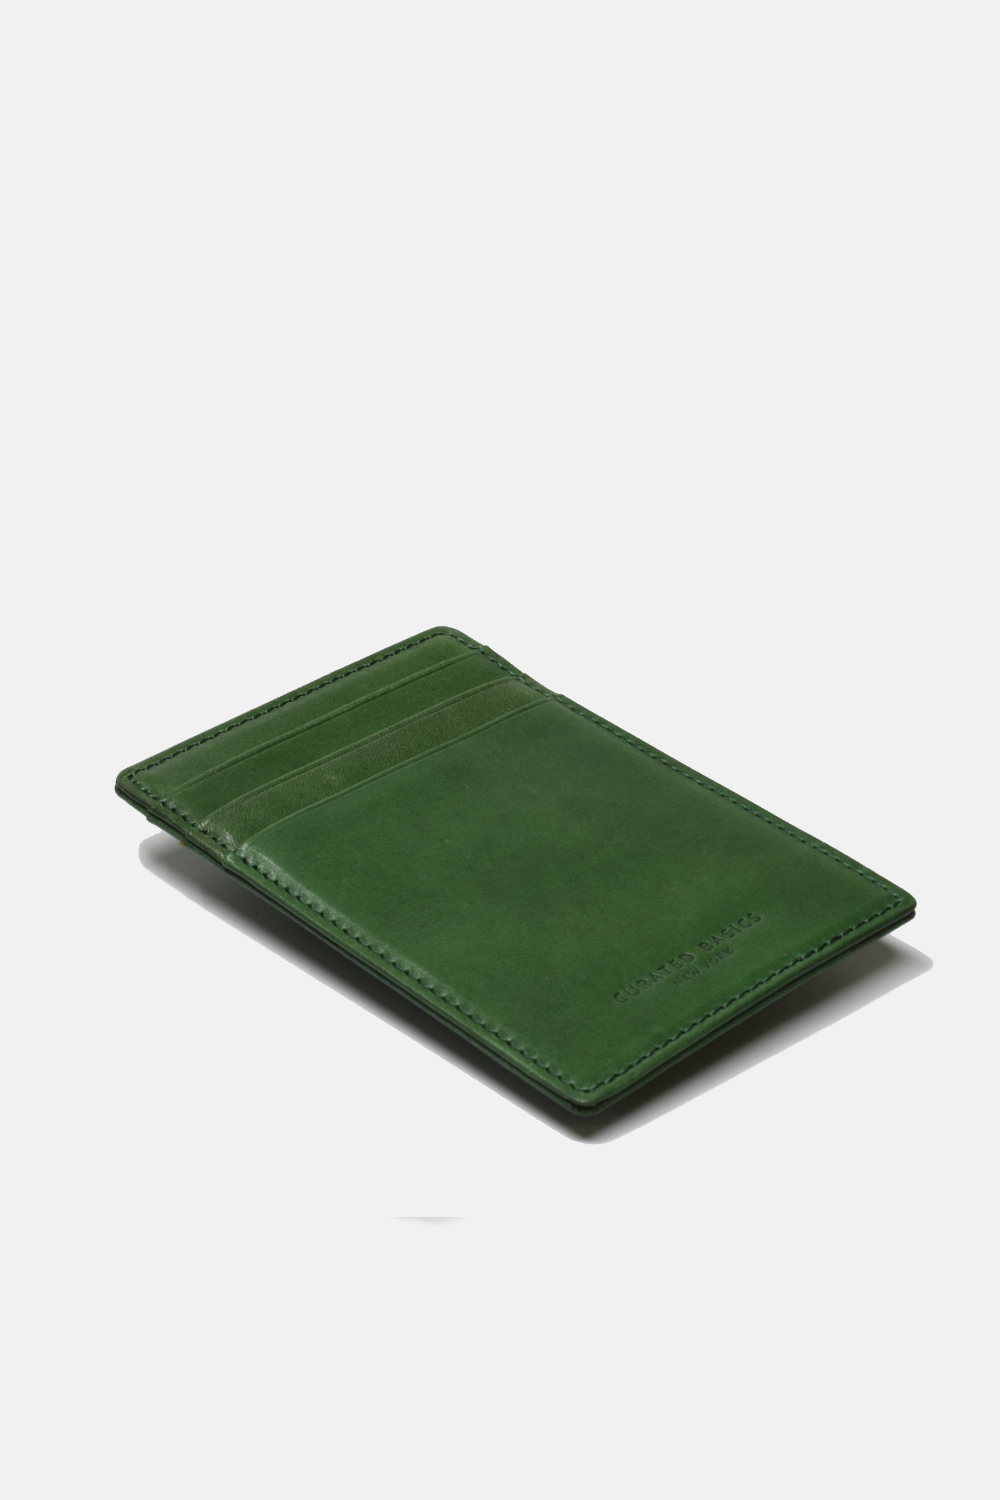 green wallet against a white background